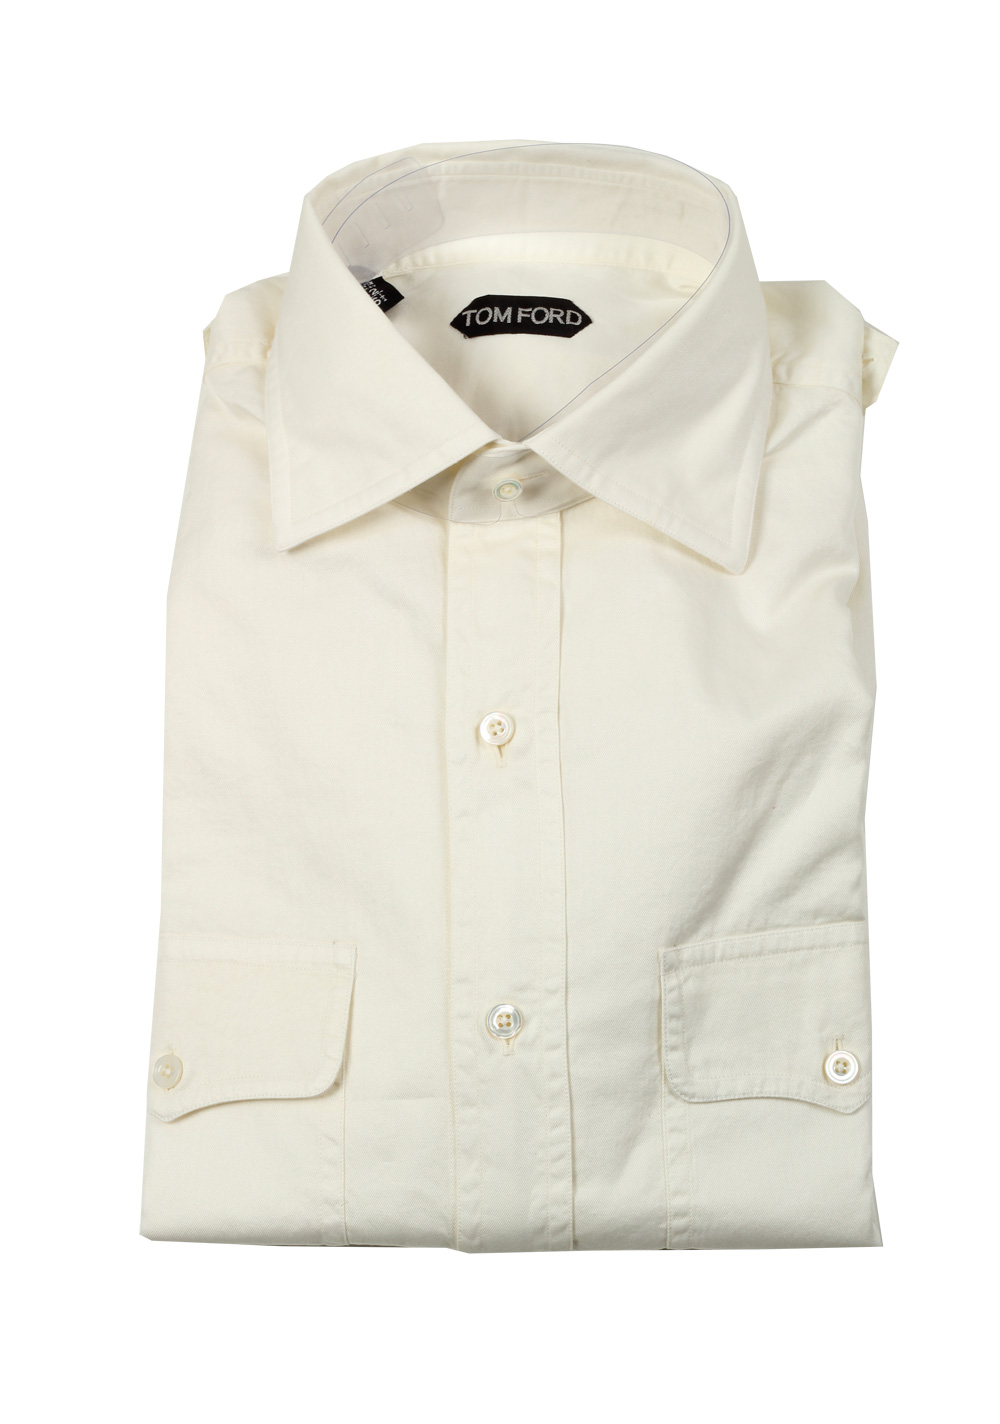 TOM FORD Solid Off White Casual Shirt Size 42 / 16,5 U.S. | Costume Limité